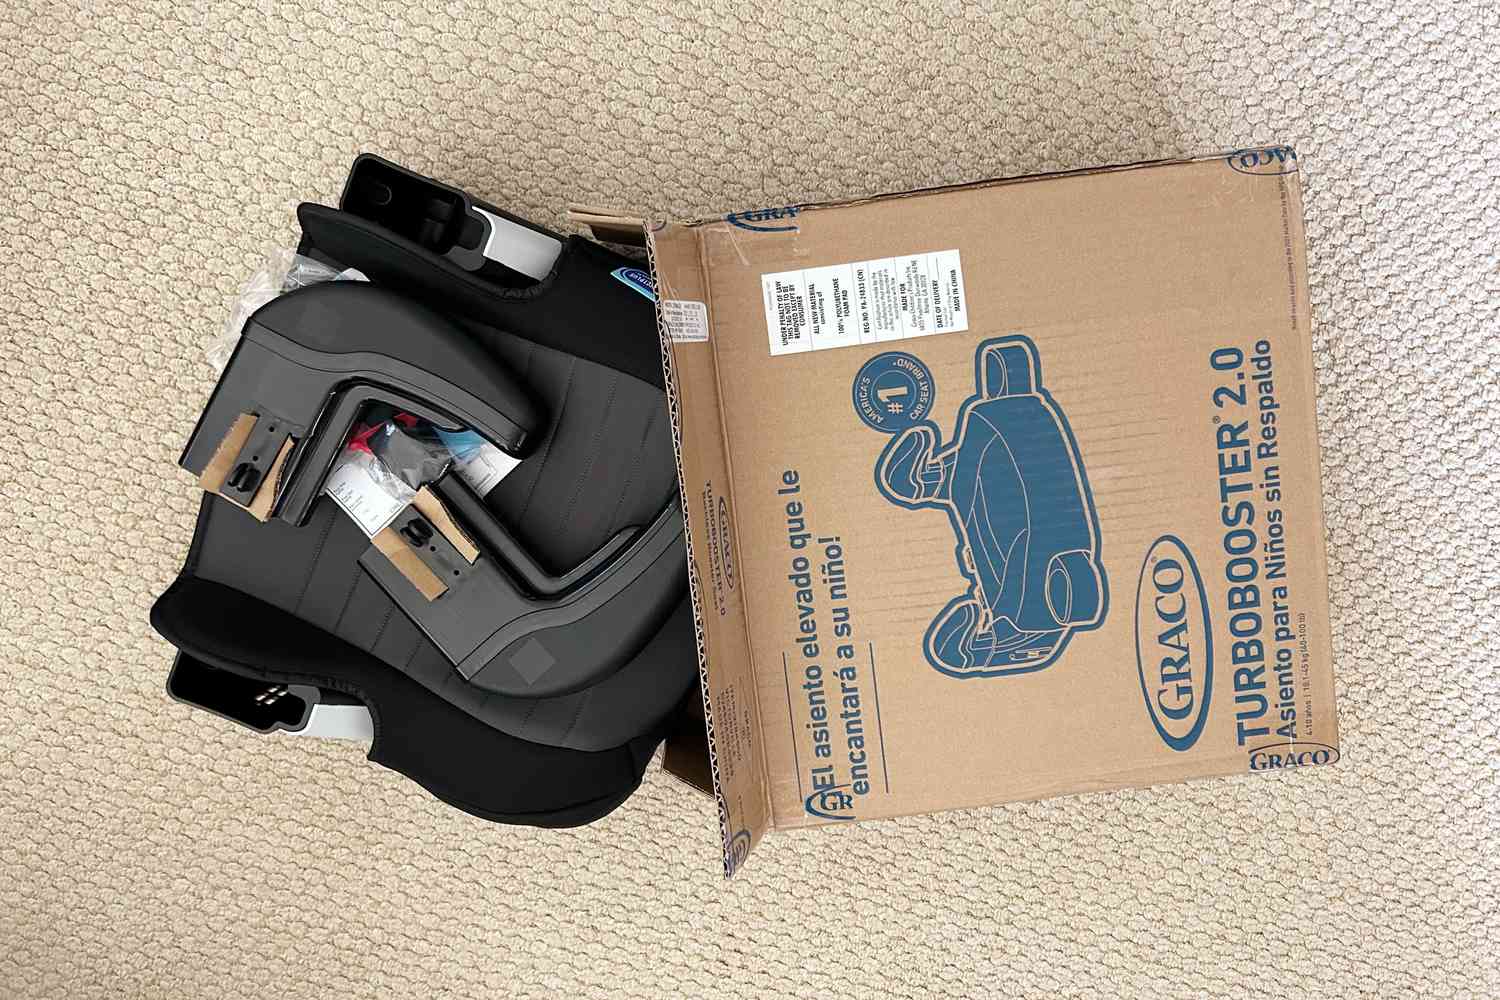 The Graco TurboBooster 2.0 Backless Booster out of the box